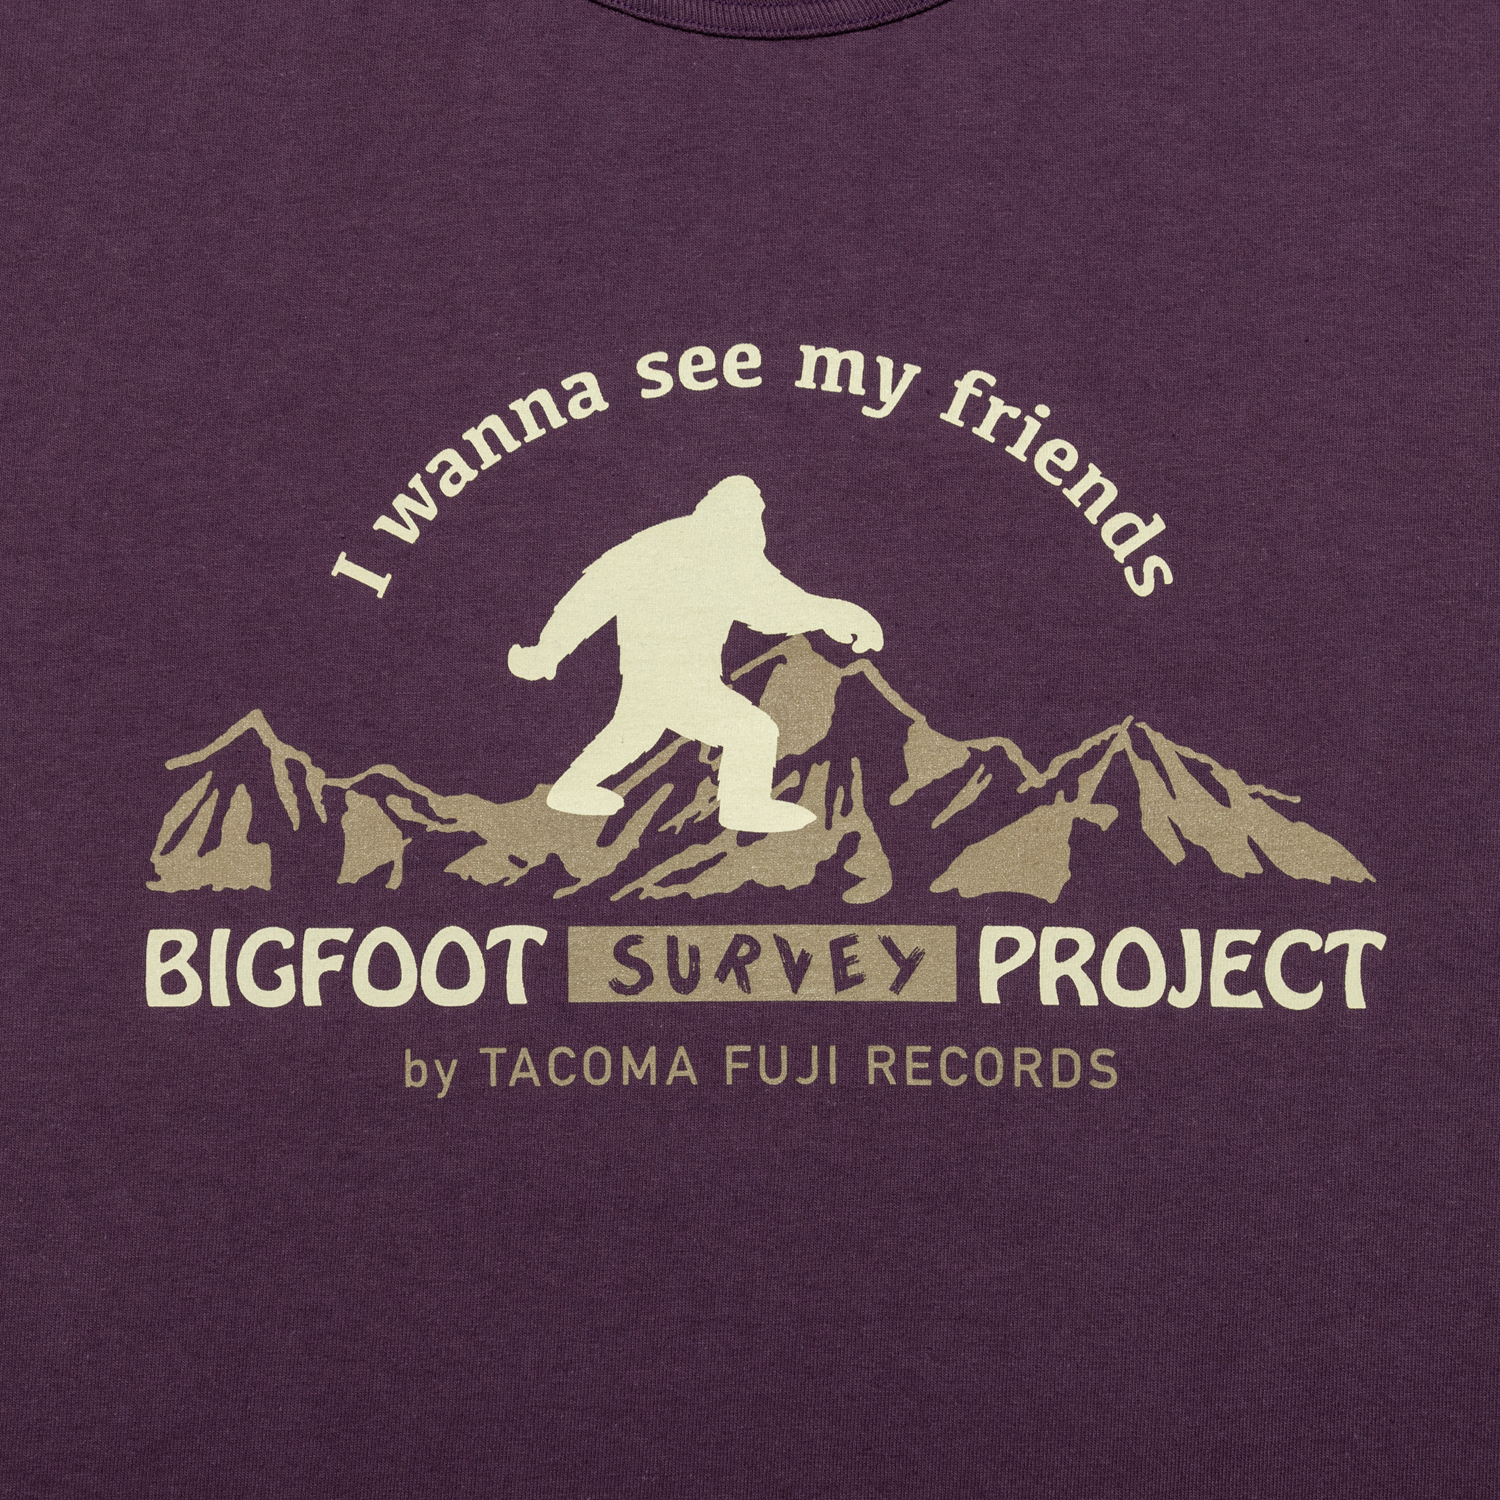 BIGFOOT SURVEY PROJECT my friends Tee designed by Jerry UKAI